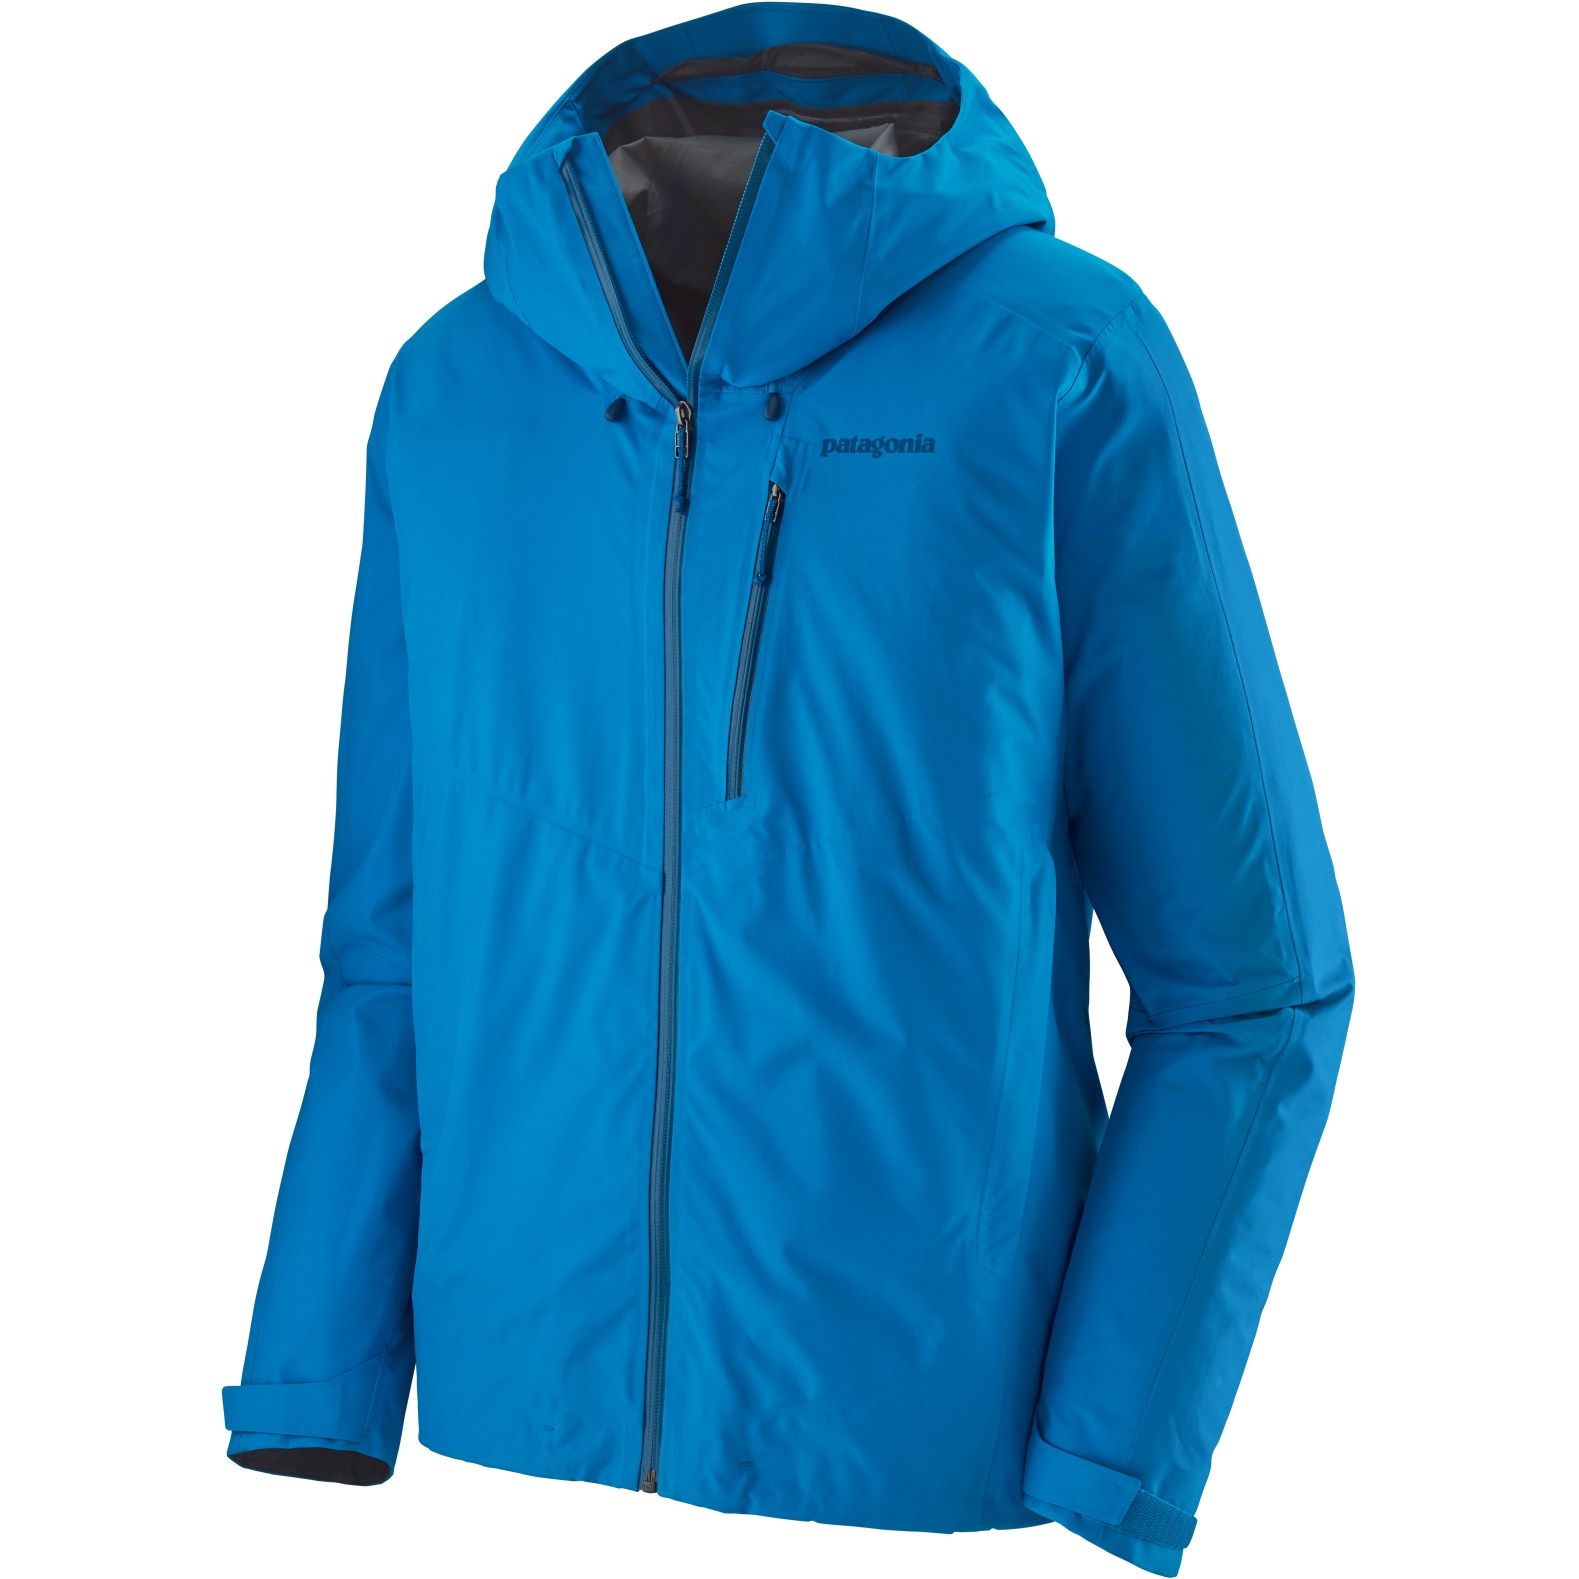 Patagonia M's Calcite Jacket - Andes Blue - XL